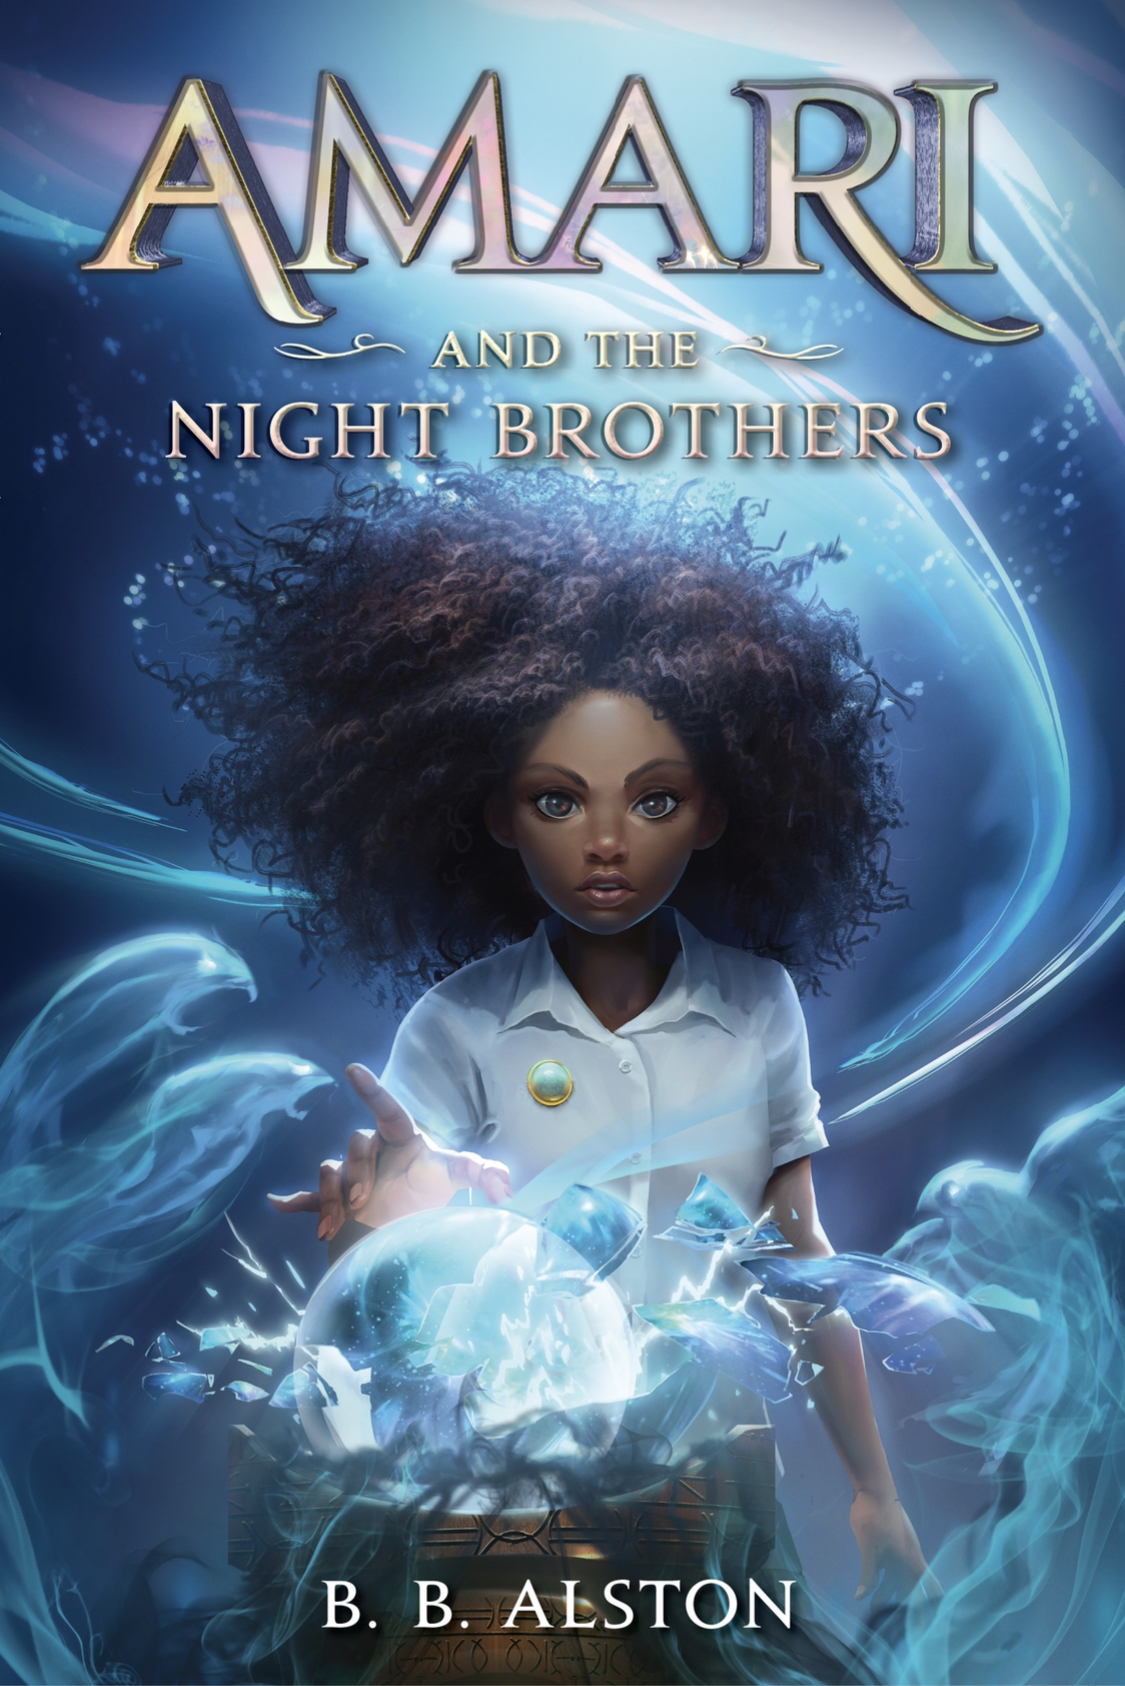 Amari and the night brothers book cover